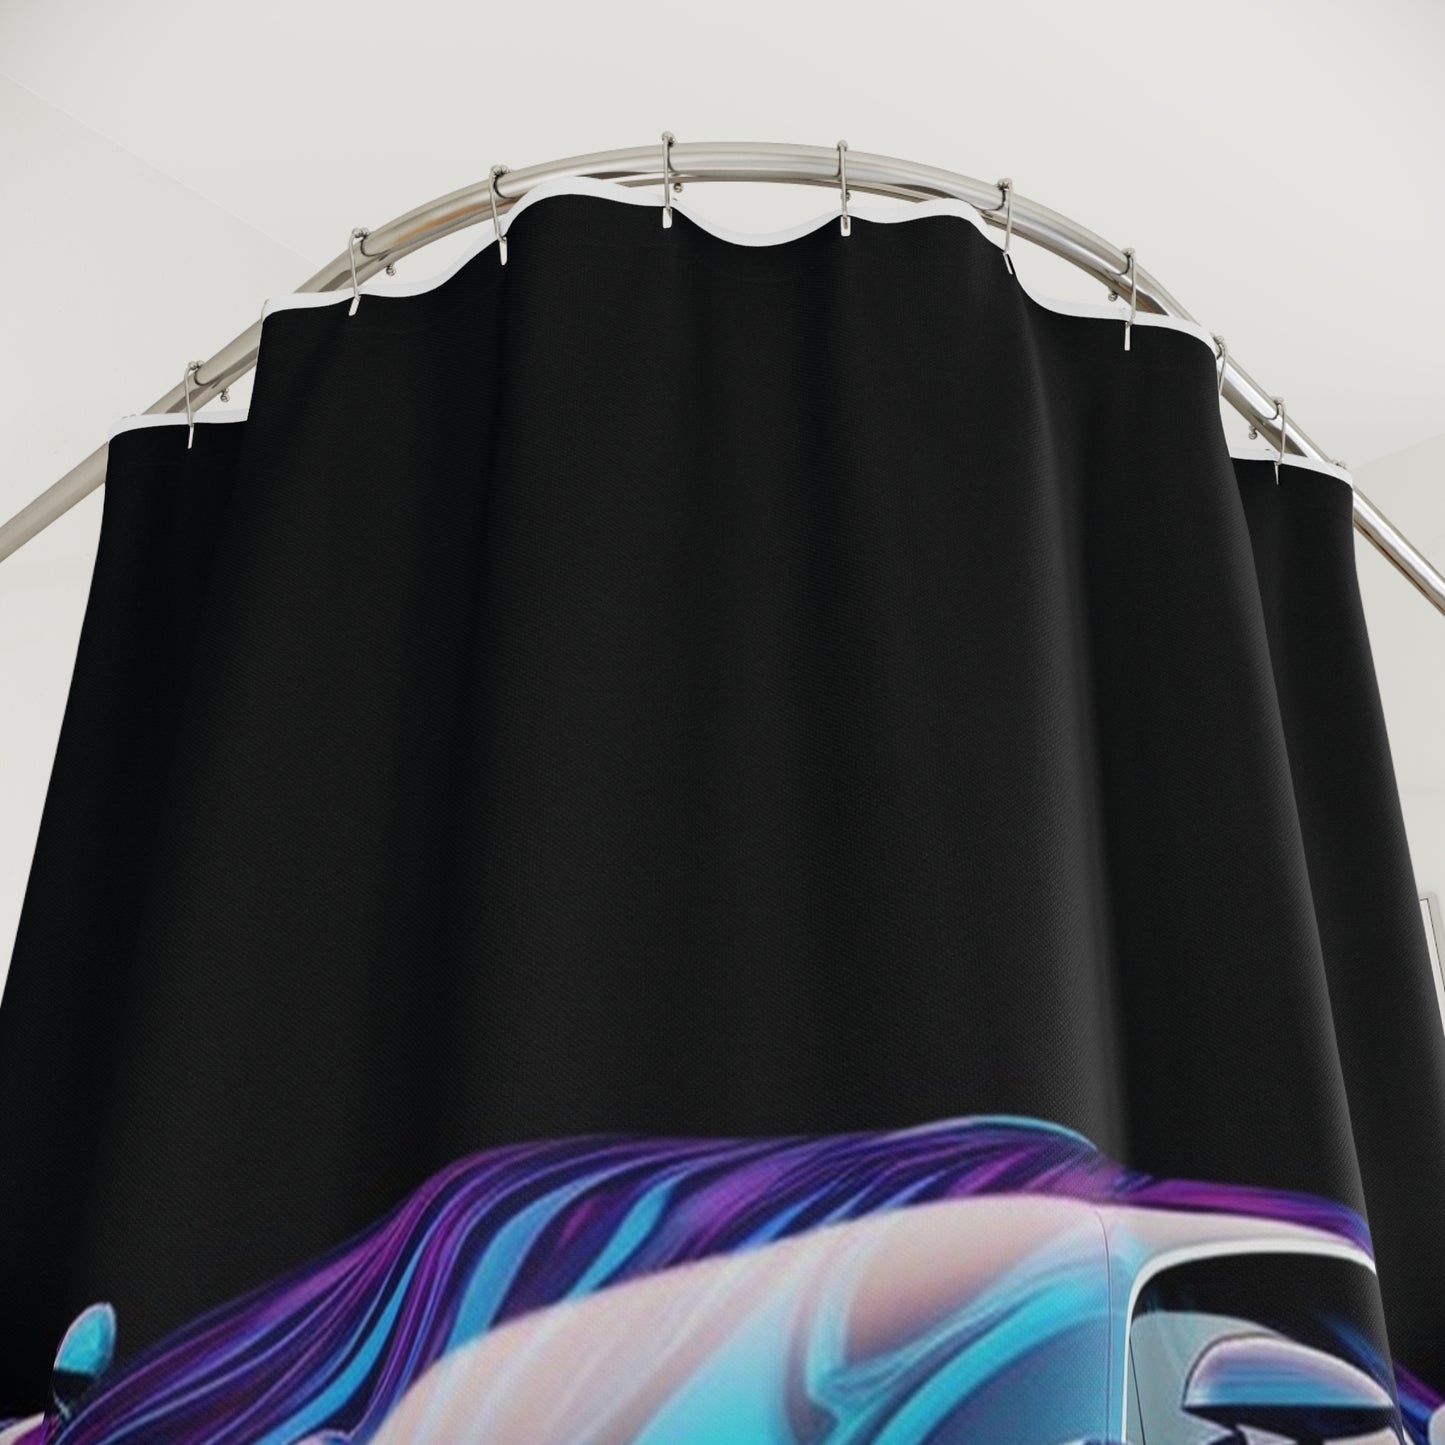 Polyester Shower Curtain Bugatti Abstract Flair 3